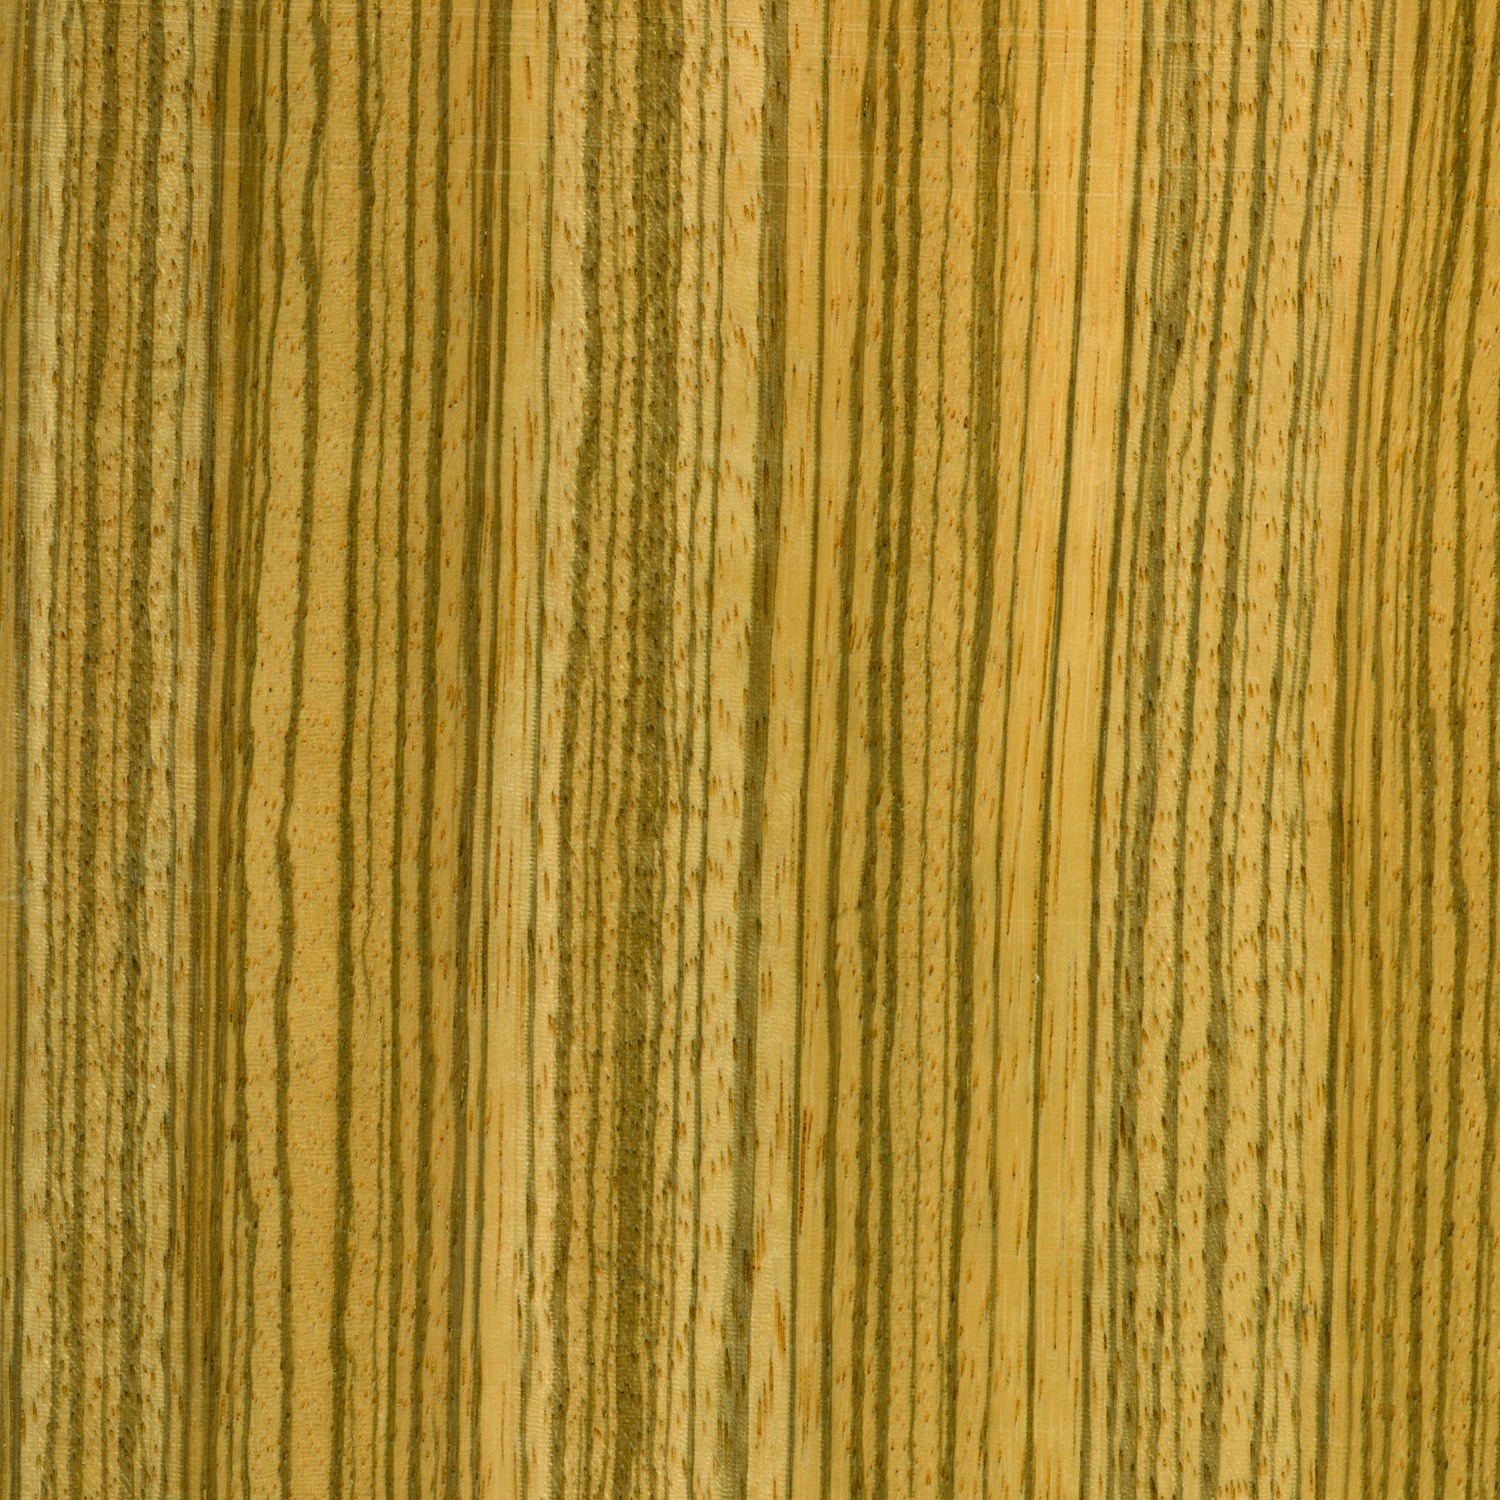 Zebrawood is a Popular Exotic Hardwood | Woodworking Network